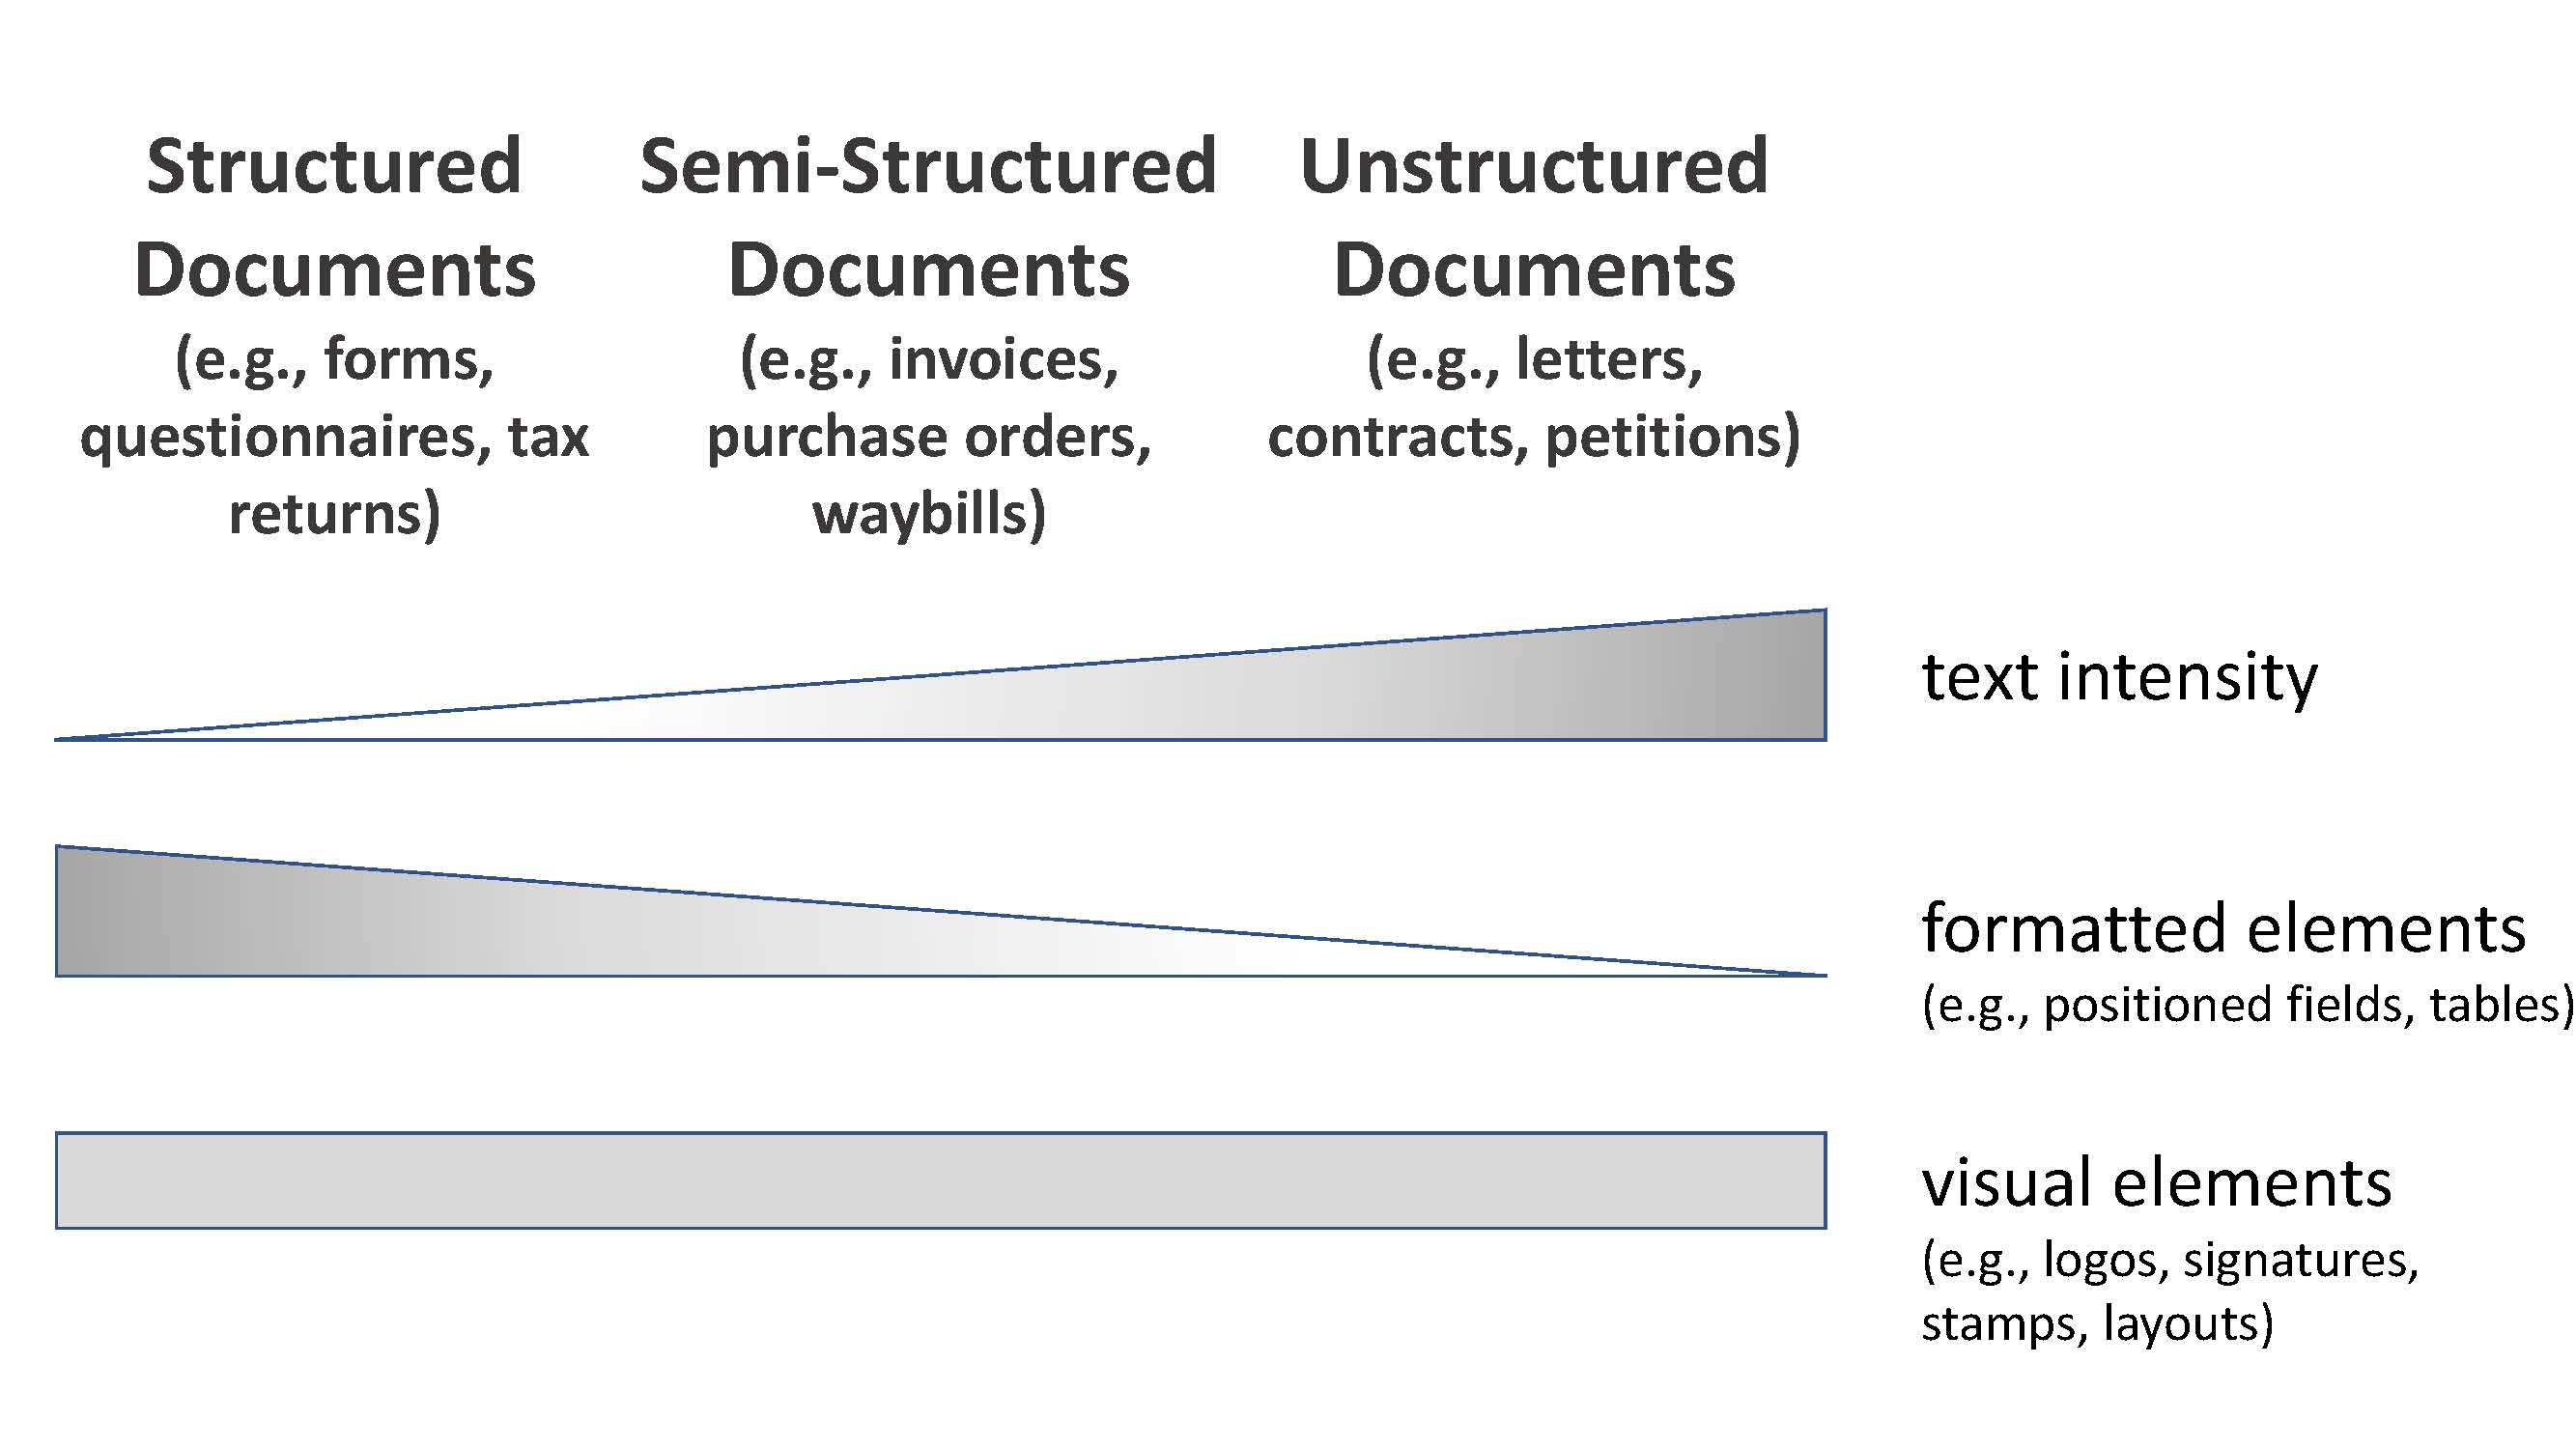 Document Types - Information Extraction